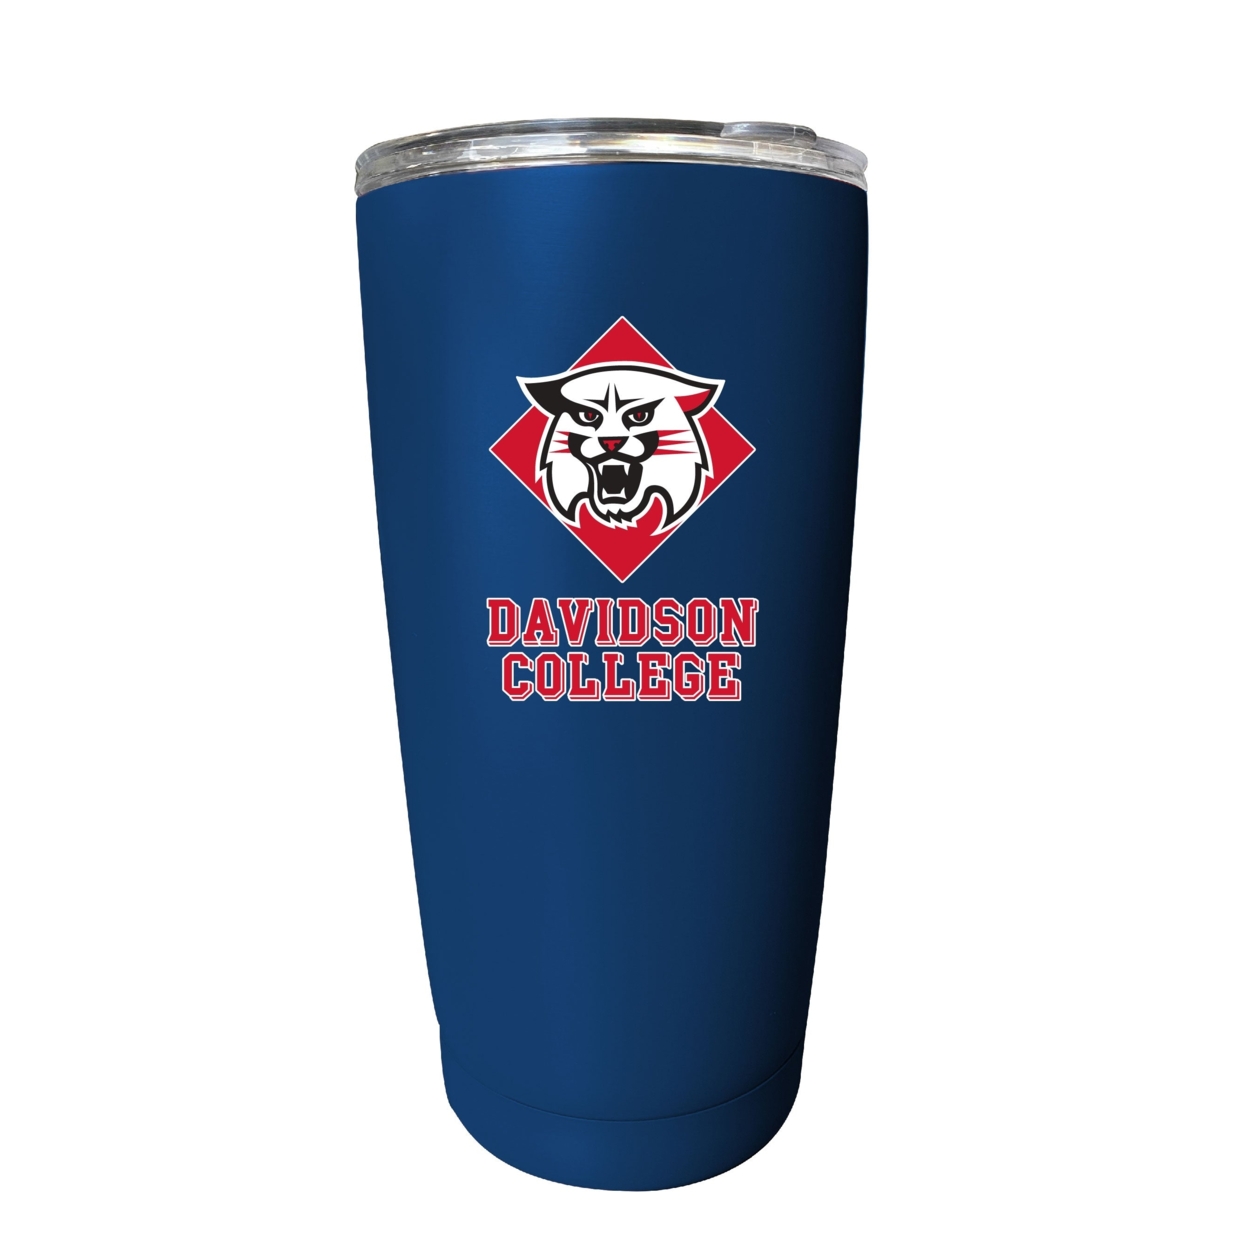 Davidson College 16 Oz Insulated Stainless Steel Tumblers - Choose Your Color - Navy